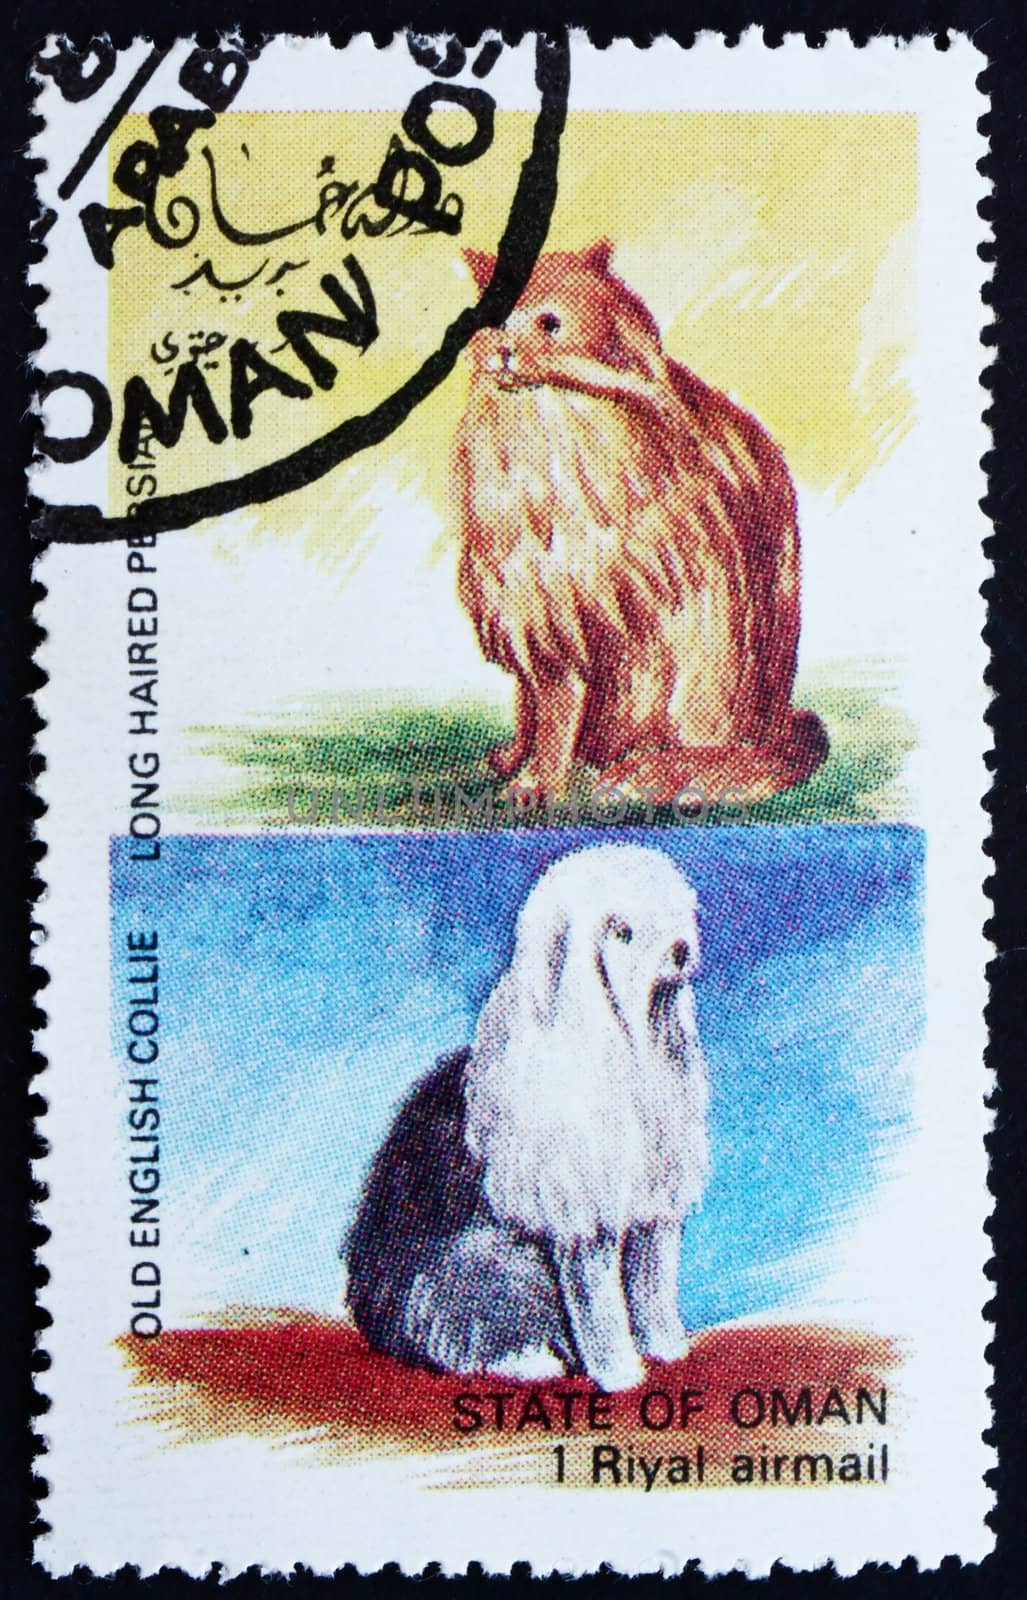 OMAN - CIRCA 1972: a stamp printed in the Oman shows Long Haired Persian Cat and Old English Collie Dog, circa 1972